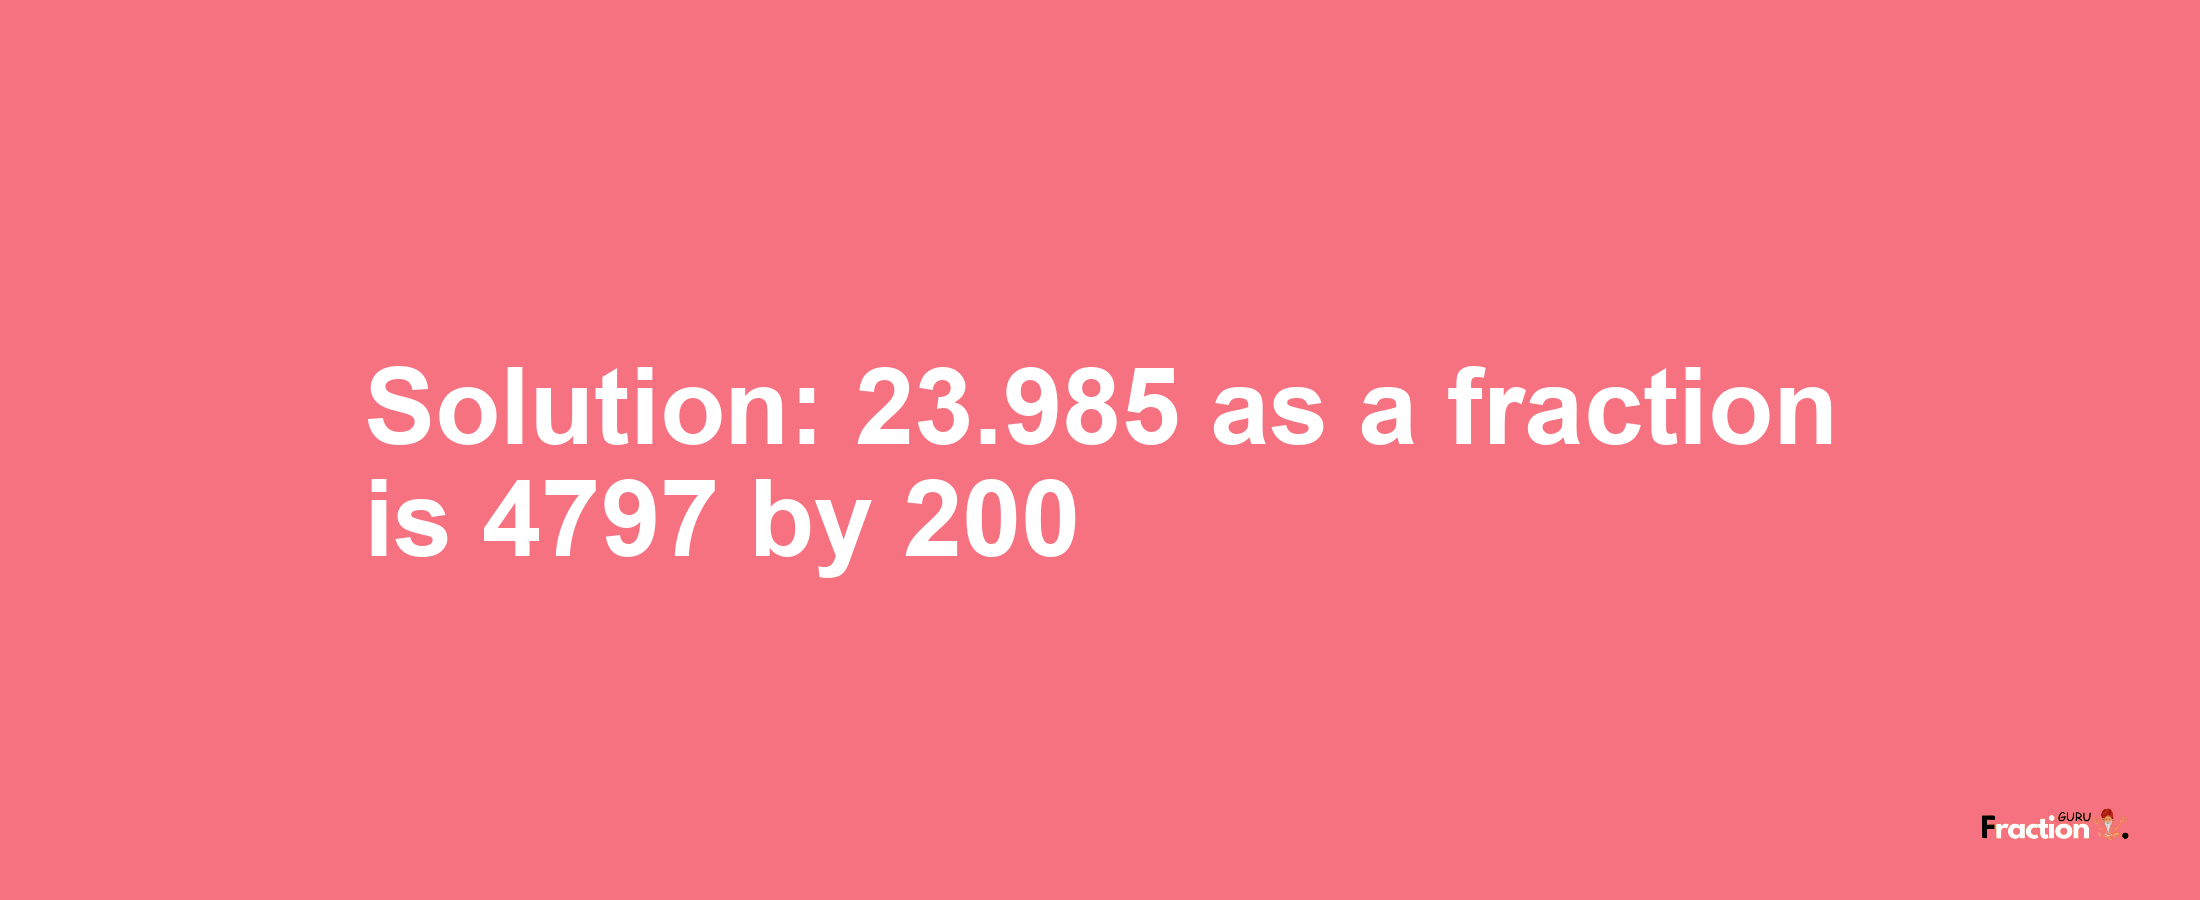 Solution:23.985 as a fraction is 4797/200